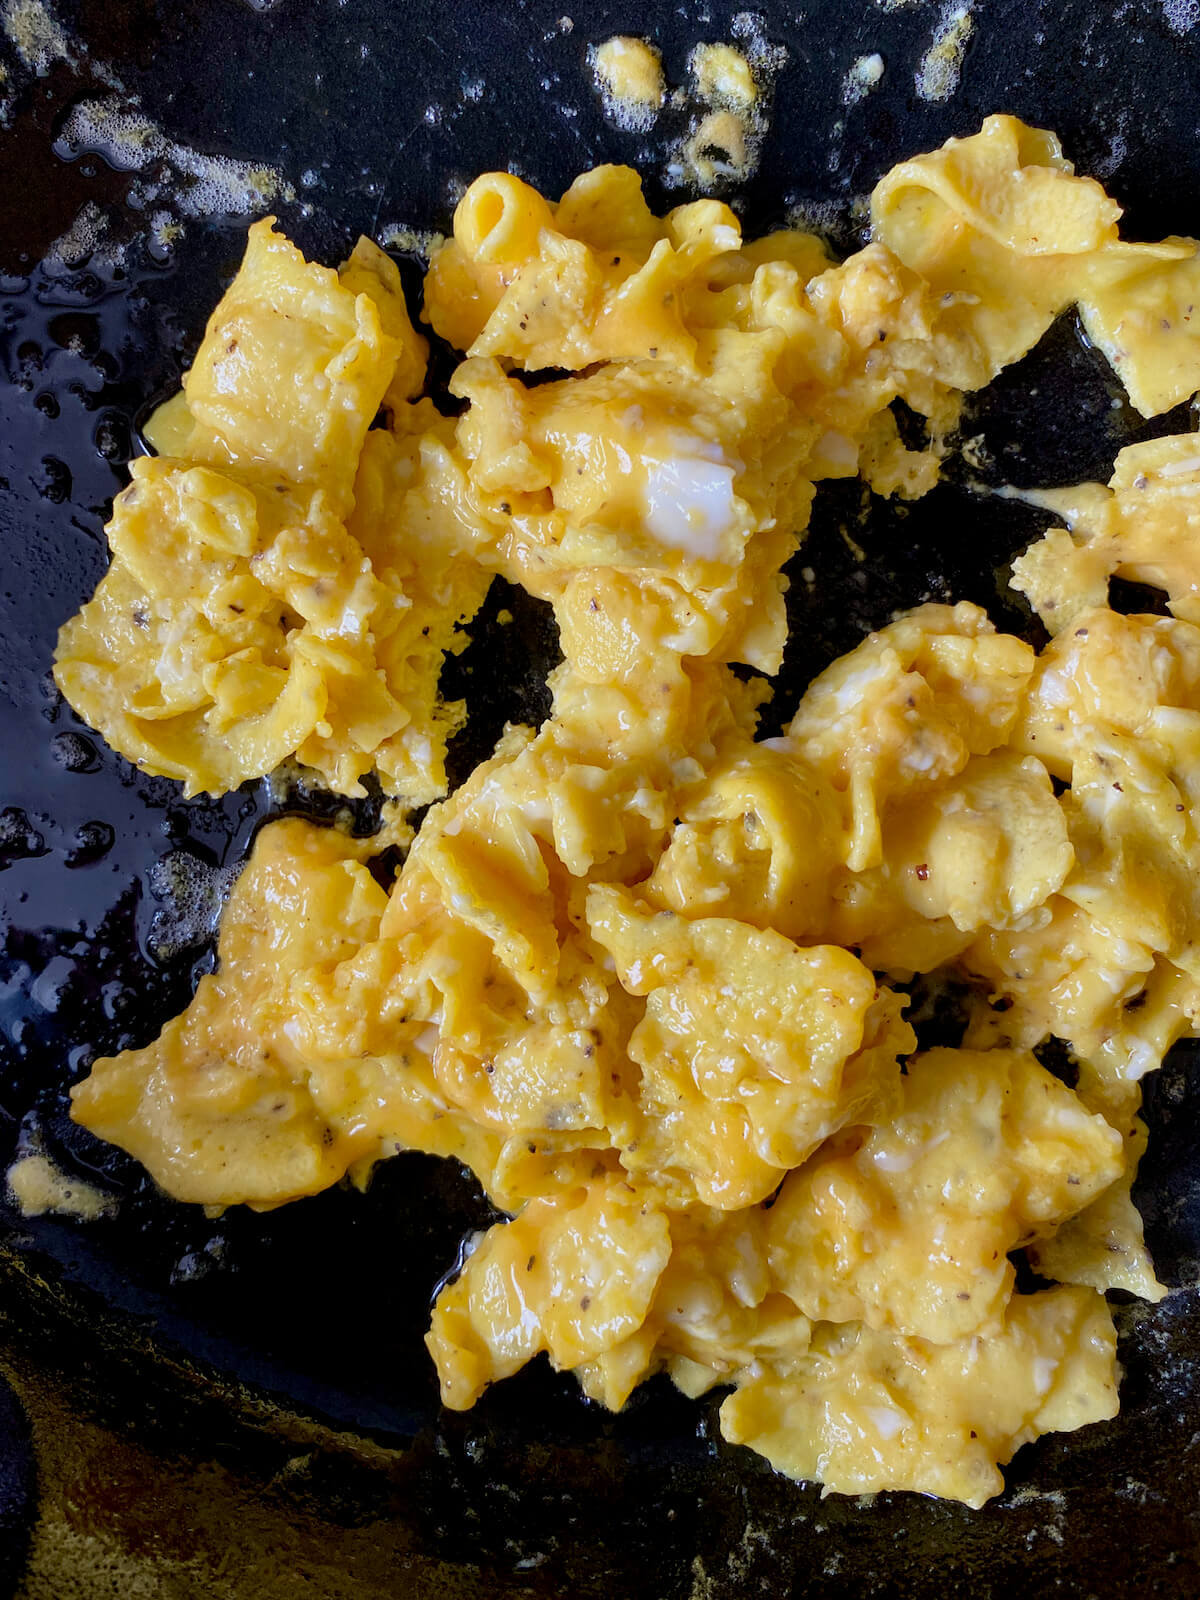 Finished scrambled eggs with cheddar cheese in a cast iron skillet.